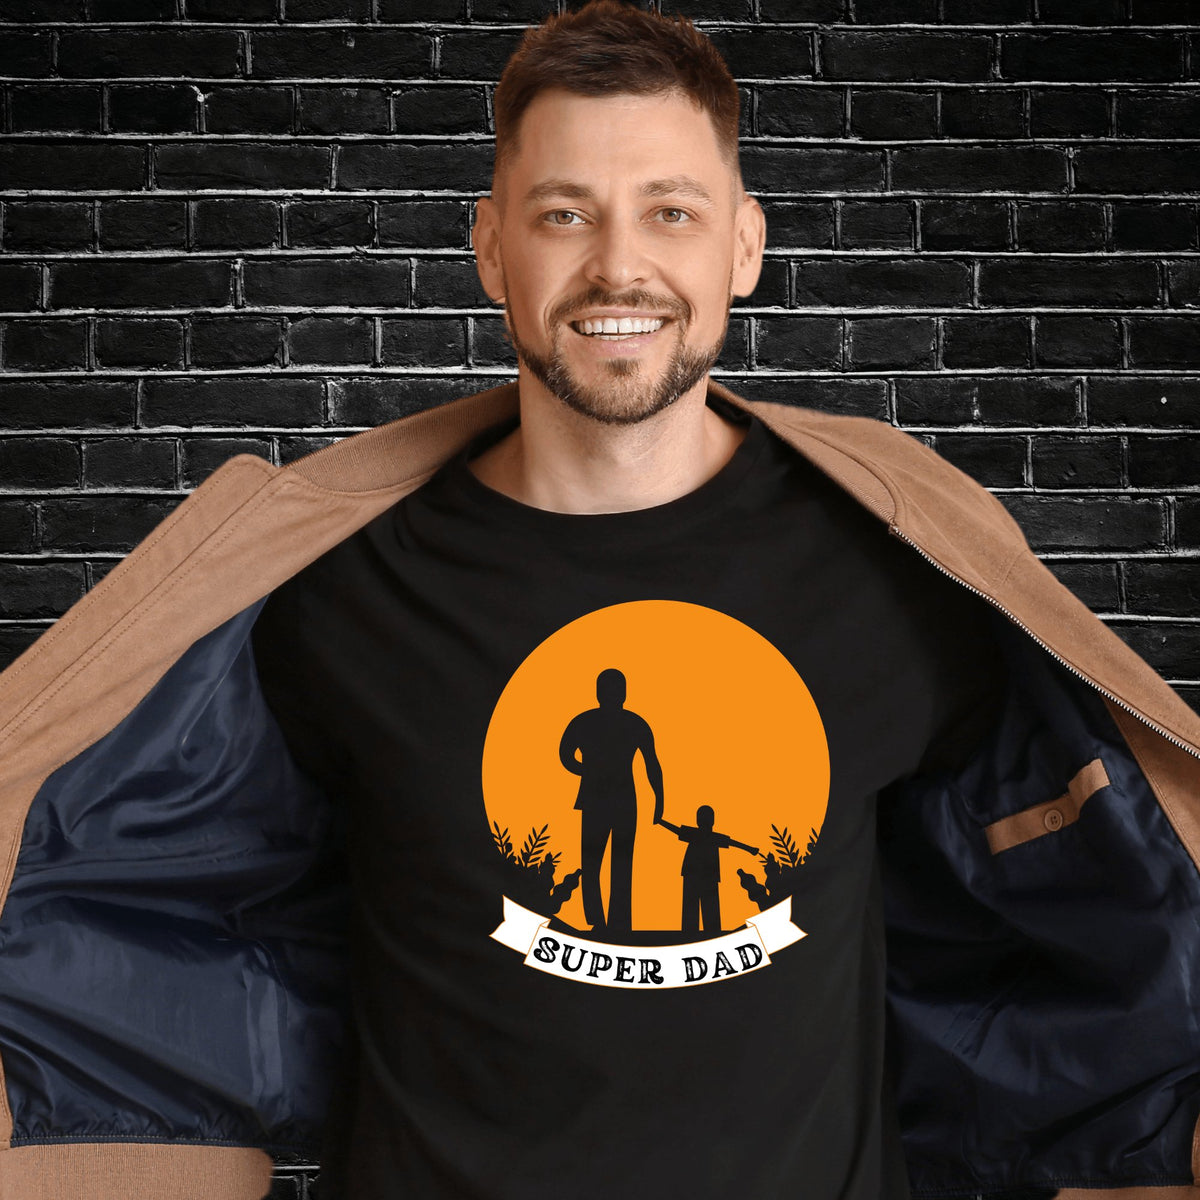 Super Dad in Sunset T-Shirt For Fathers Day Dads Gift - Eventwisecreations